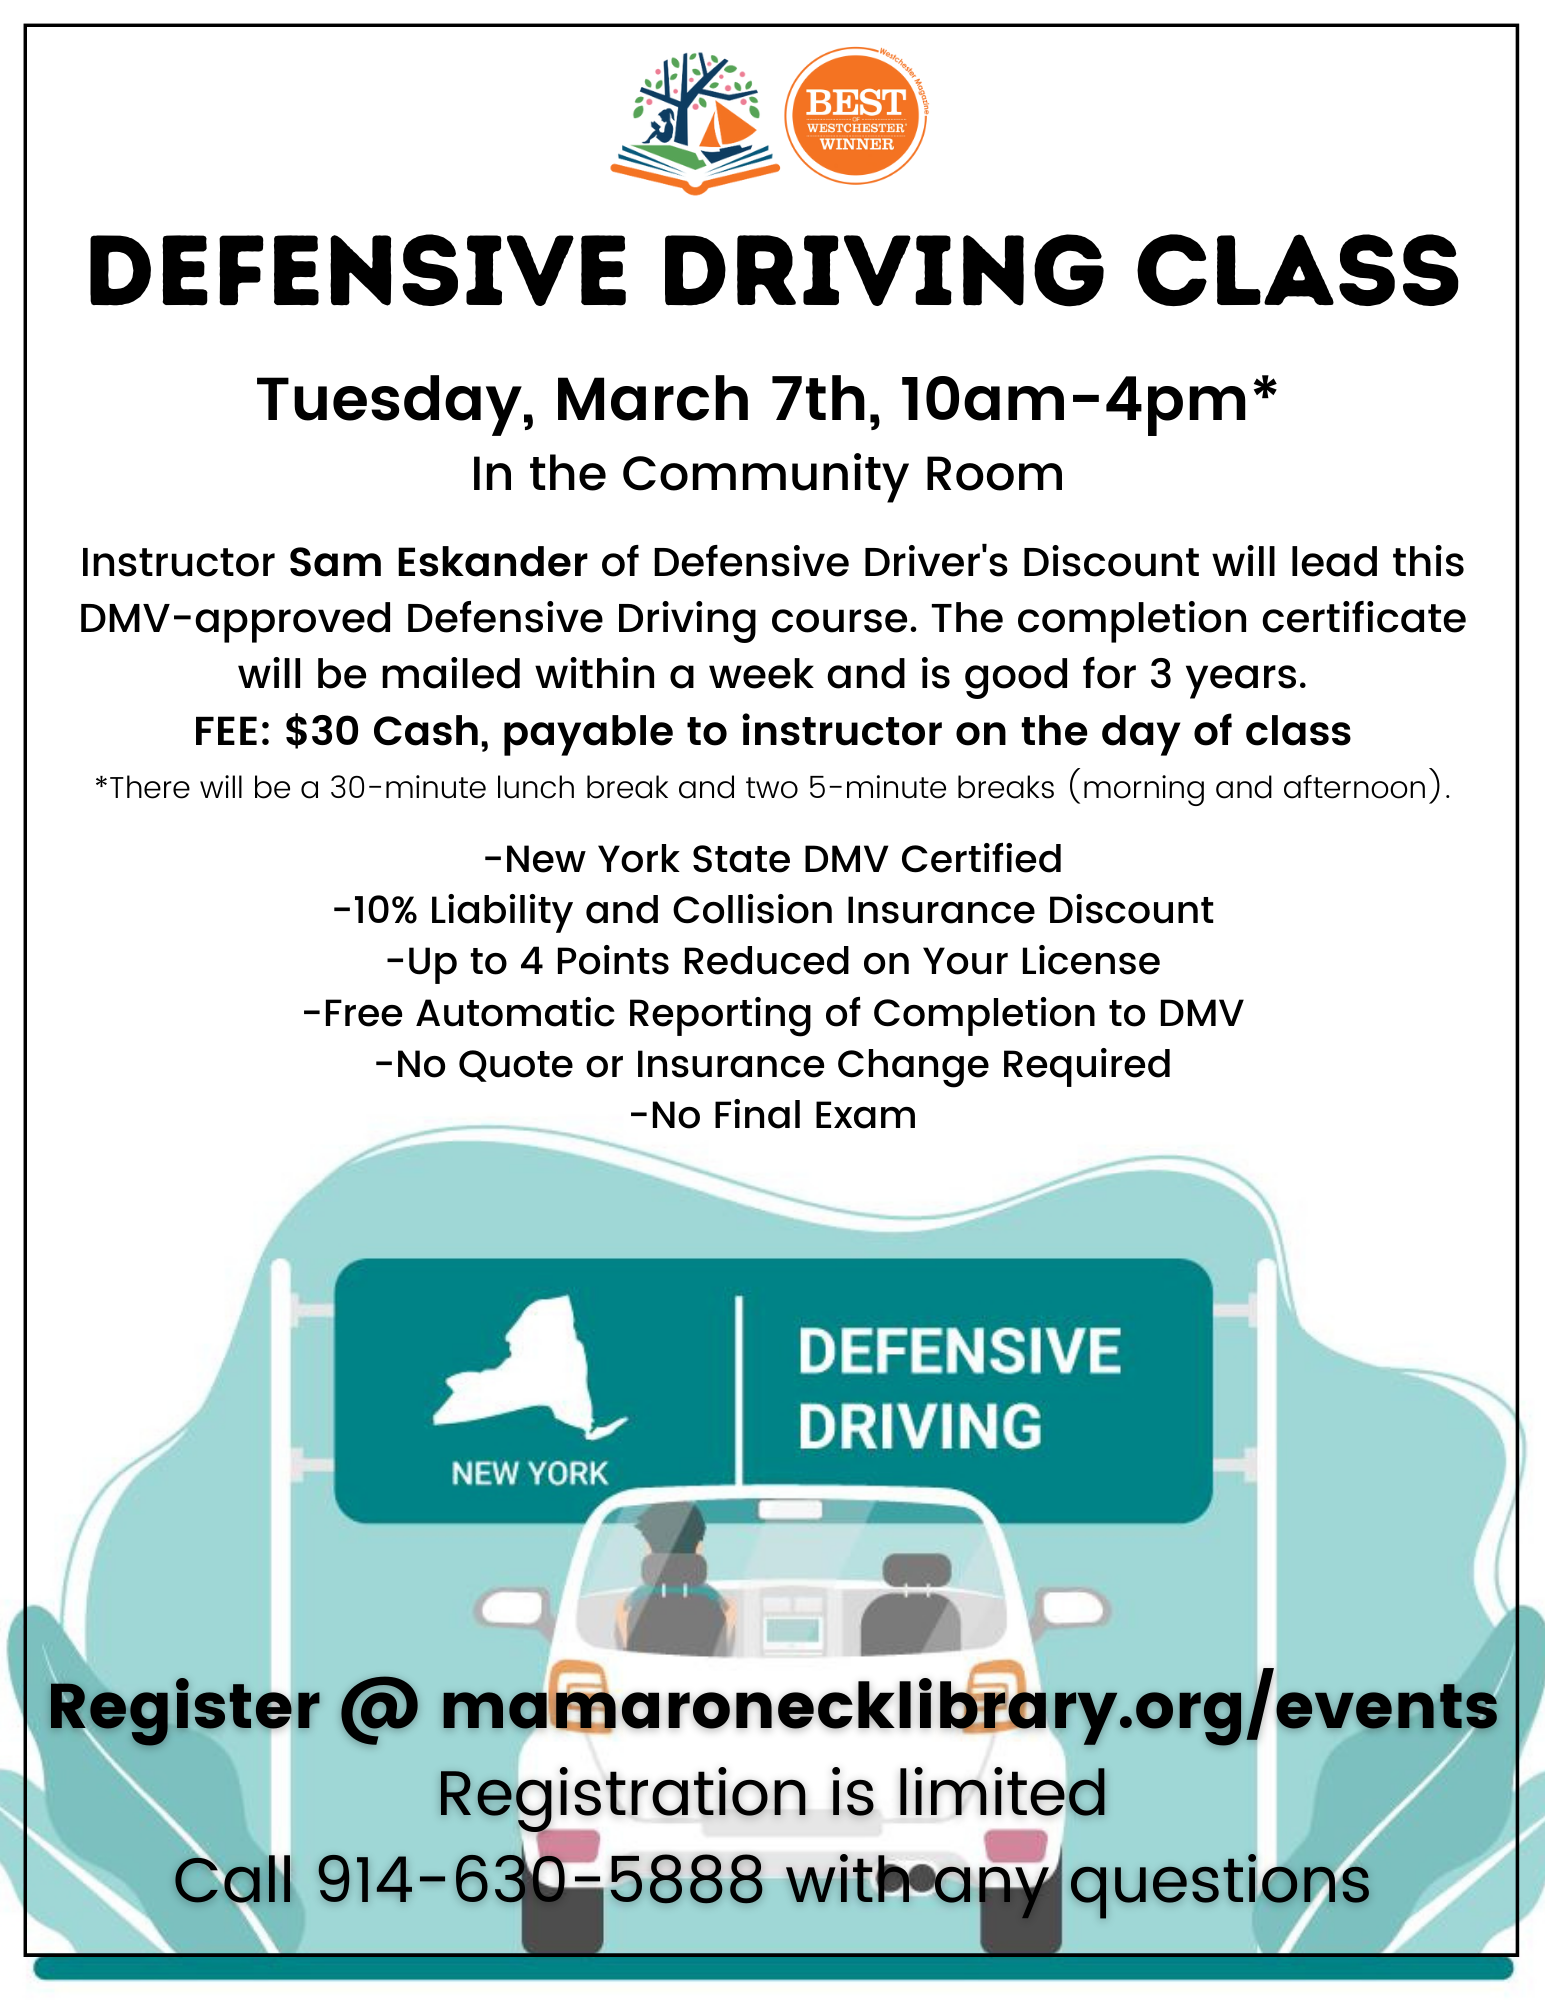 3/7 @ 10am - 4pm in the Community Room: Defensive Driving (limit: 40 people)